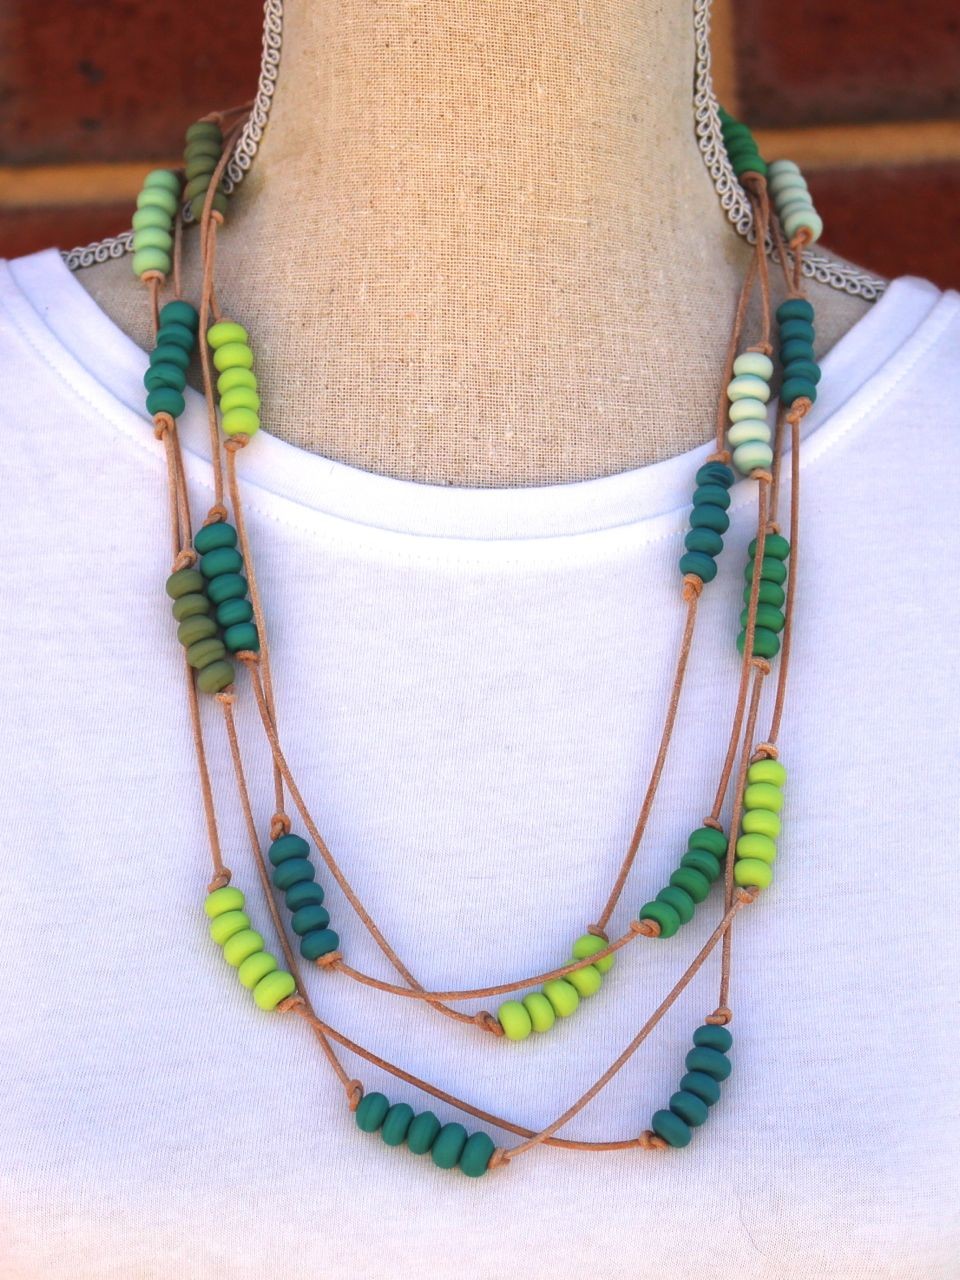 Green beads on leather wraparound necklace.